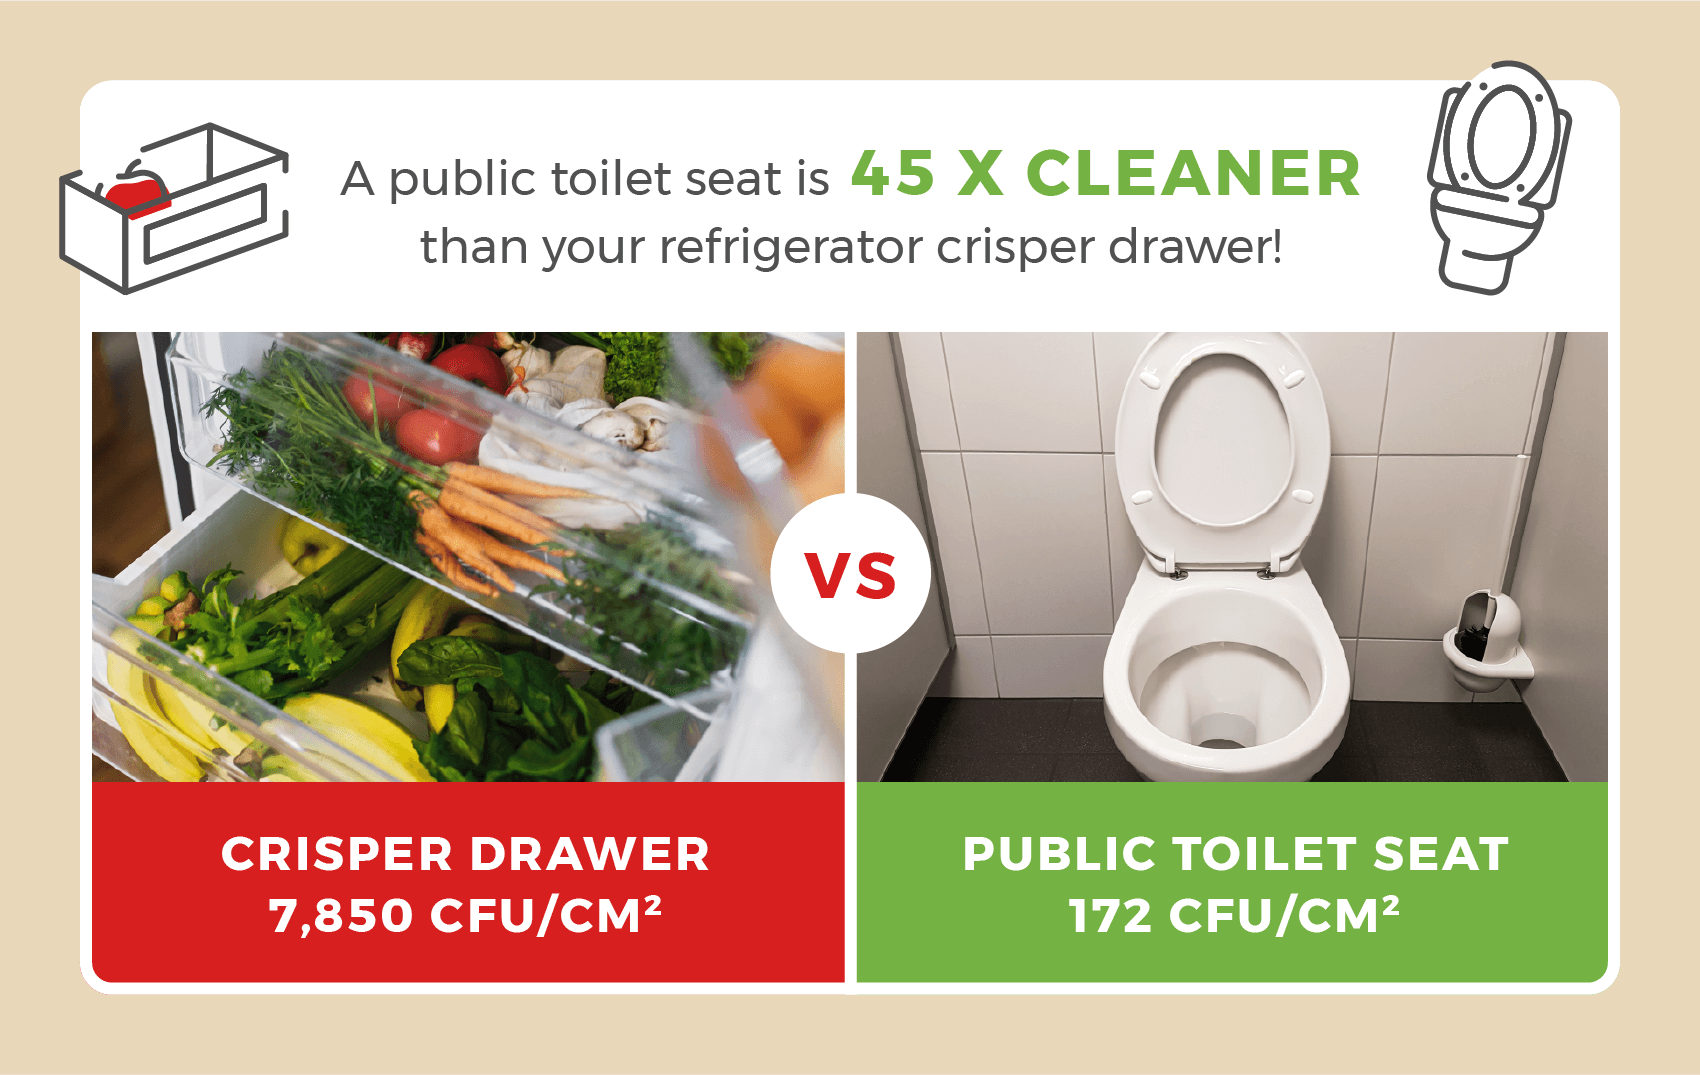 A public toilet seat is 45 times cleaner than a vegetable drawer.